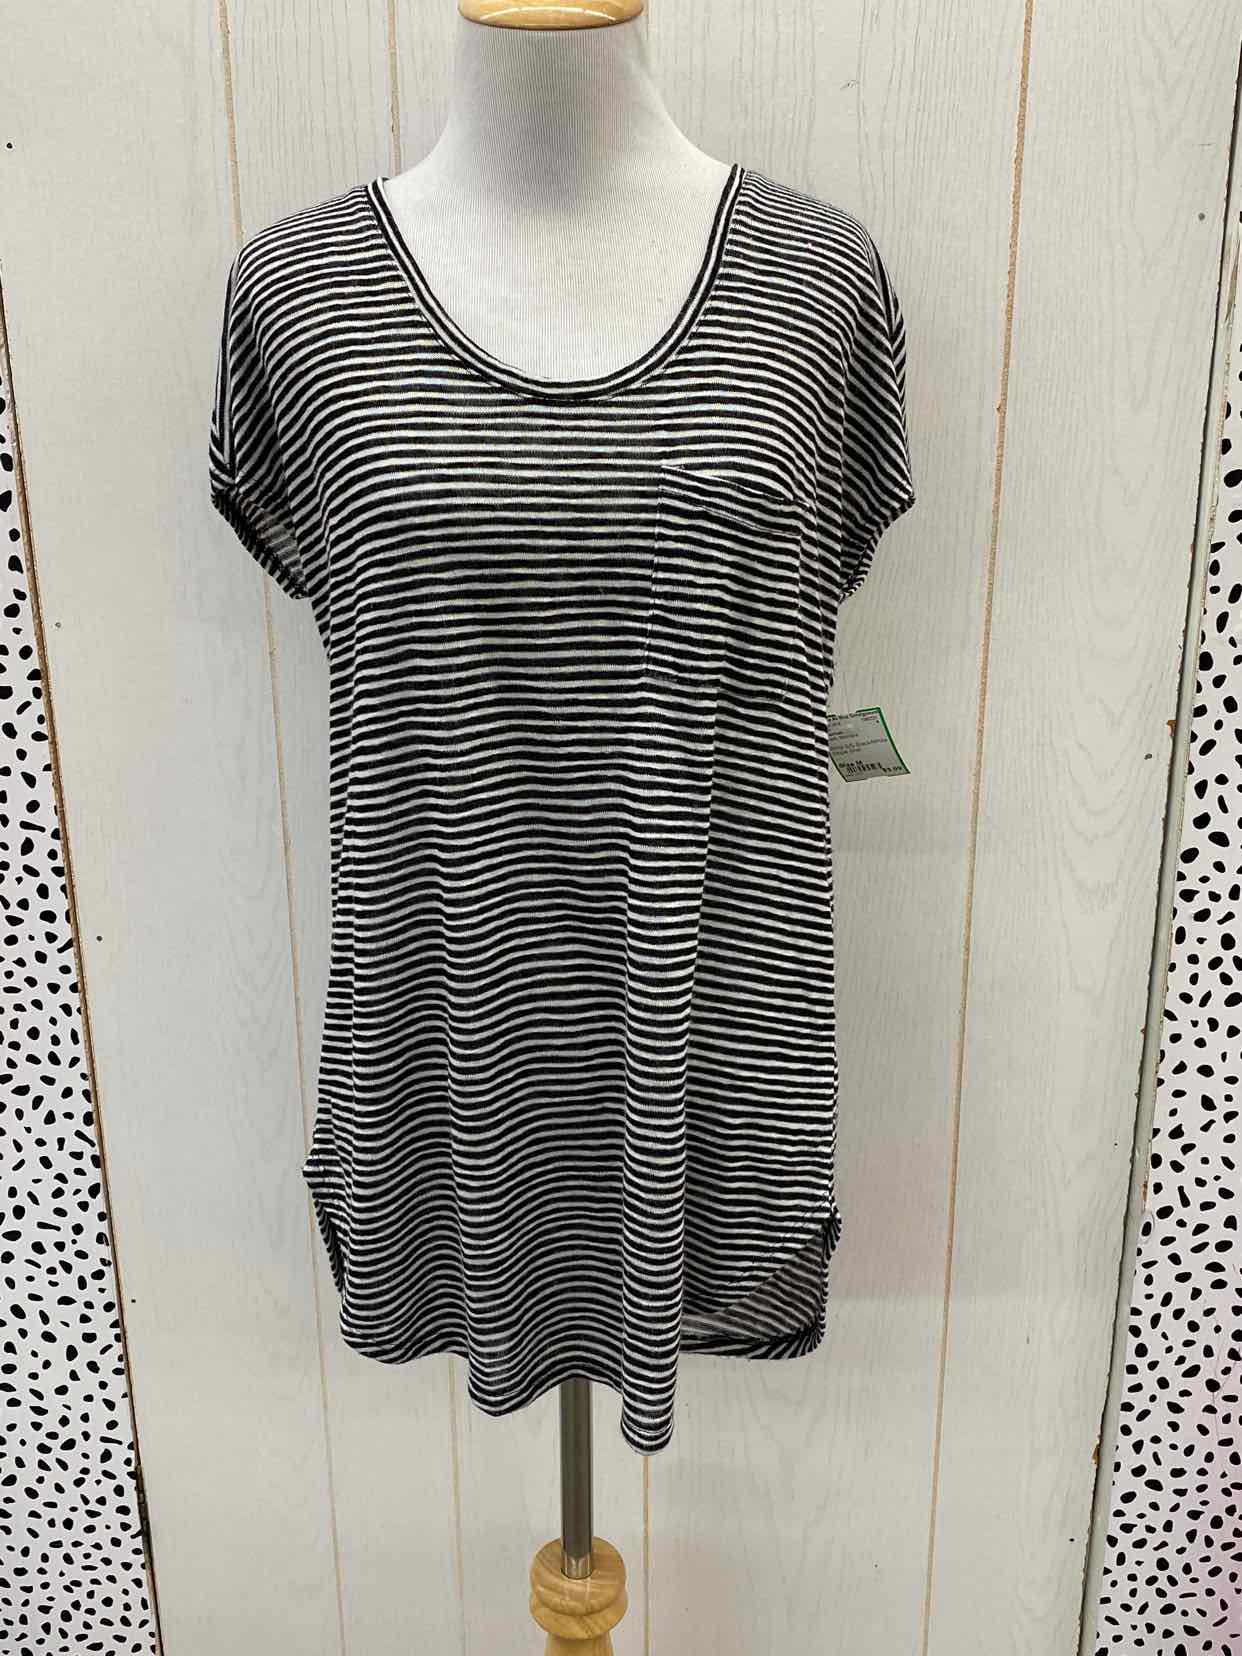 Maurices Black Womens Size M Shirt